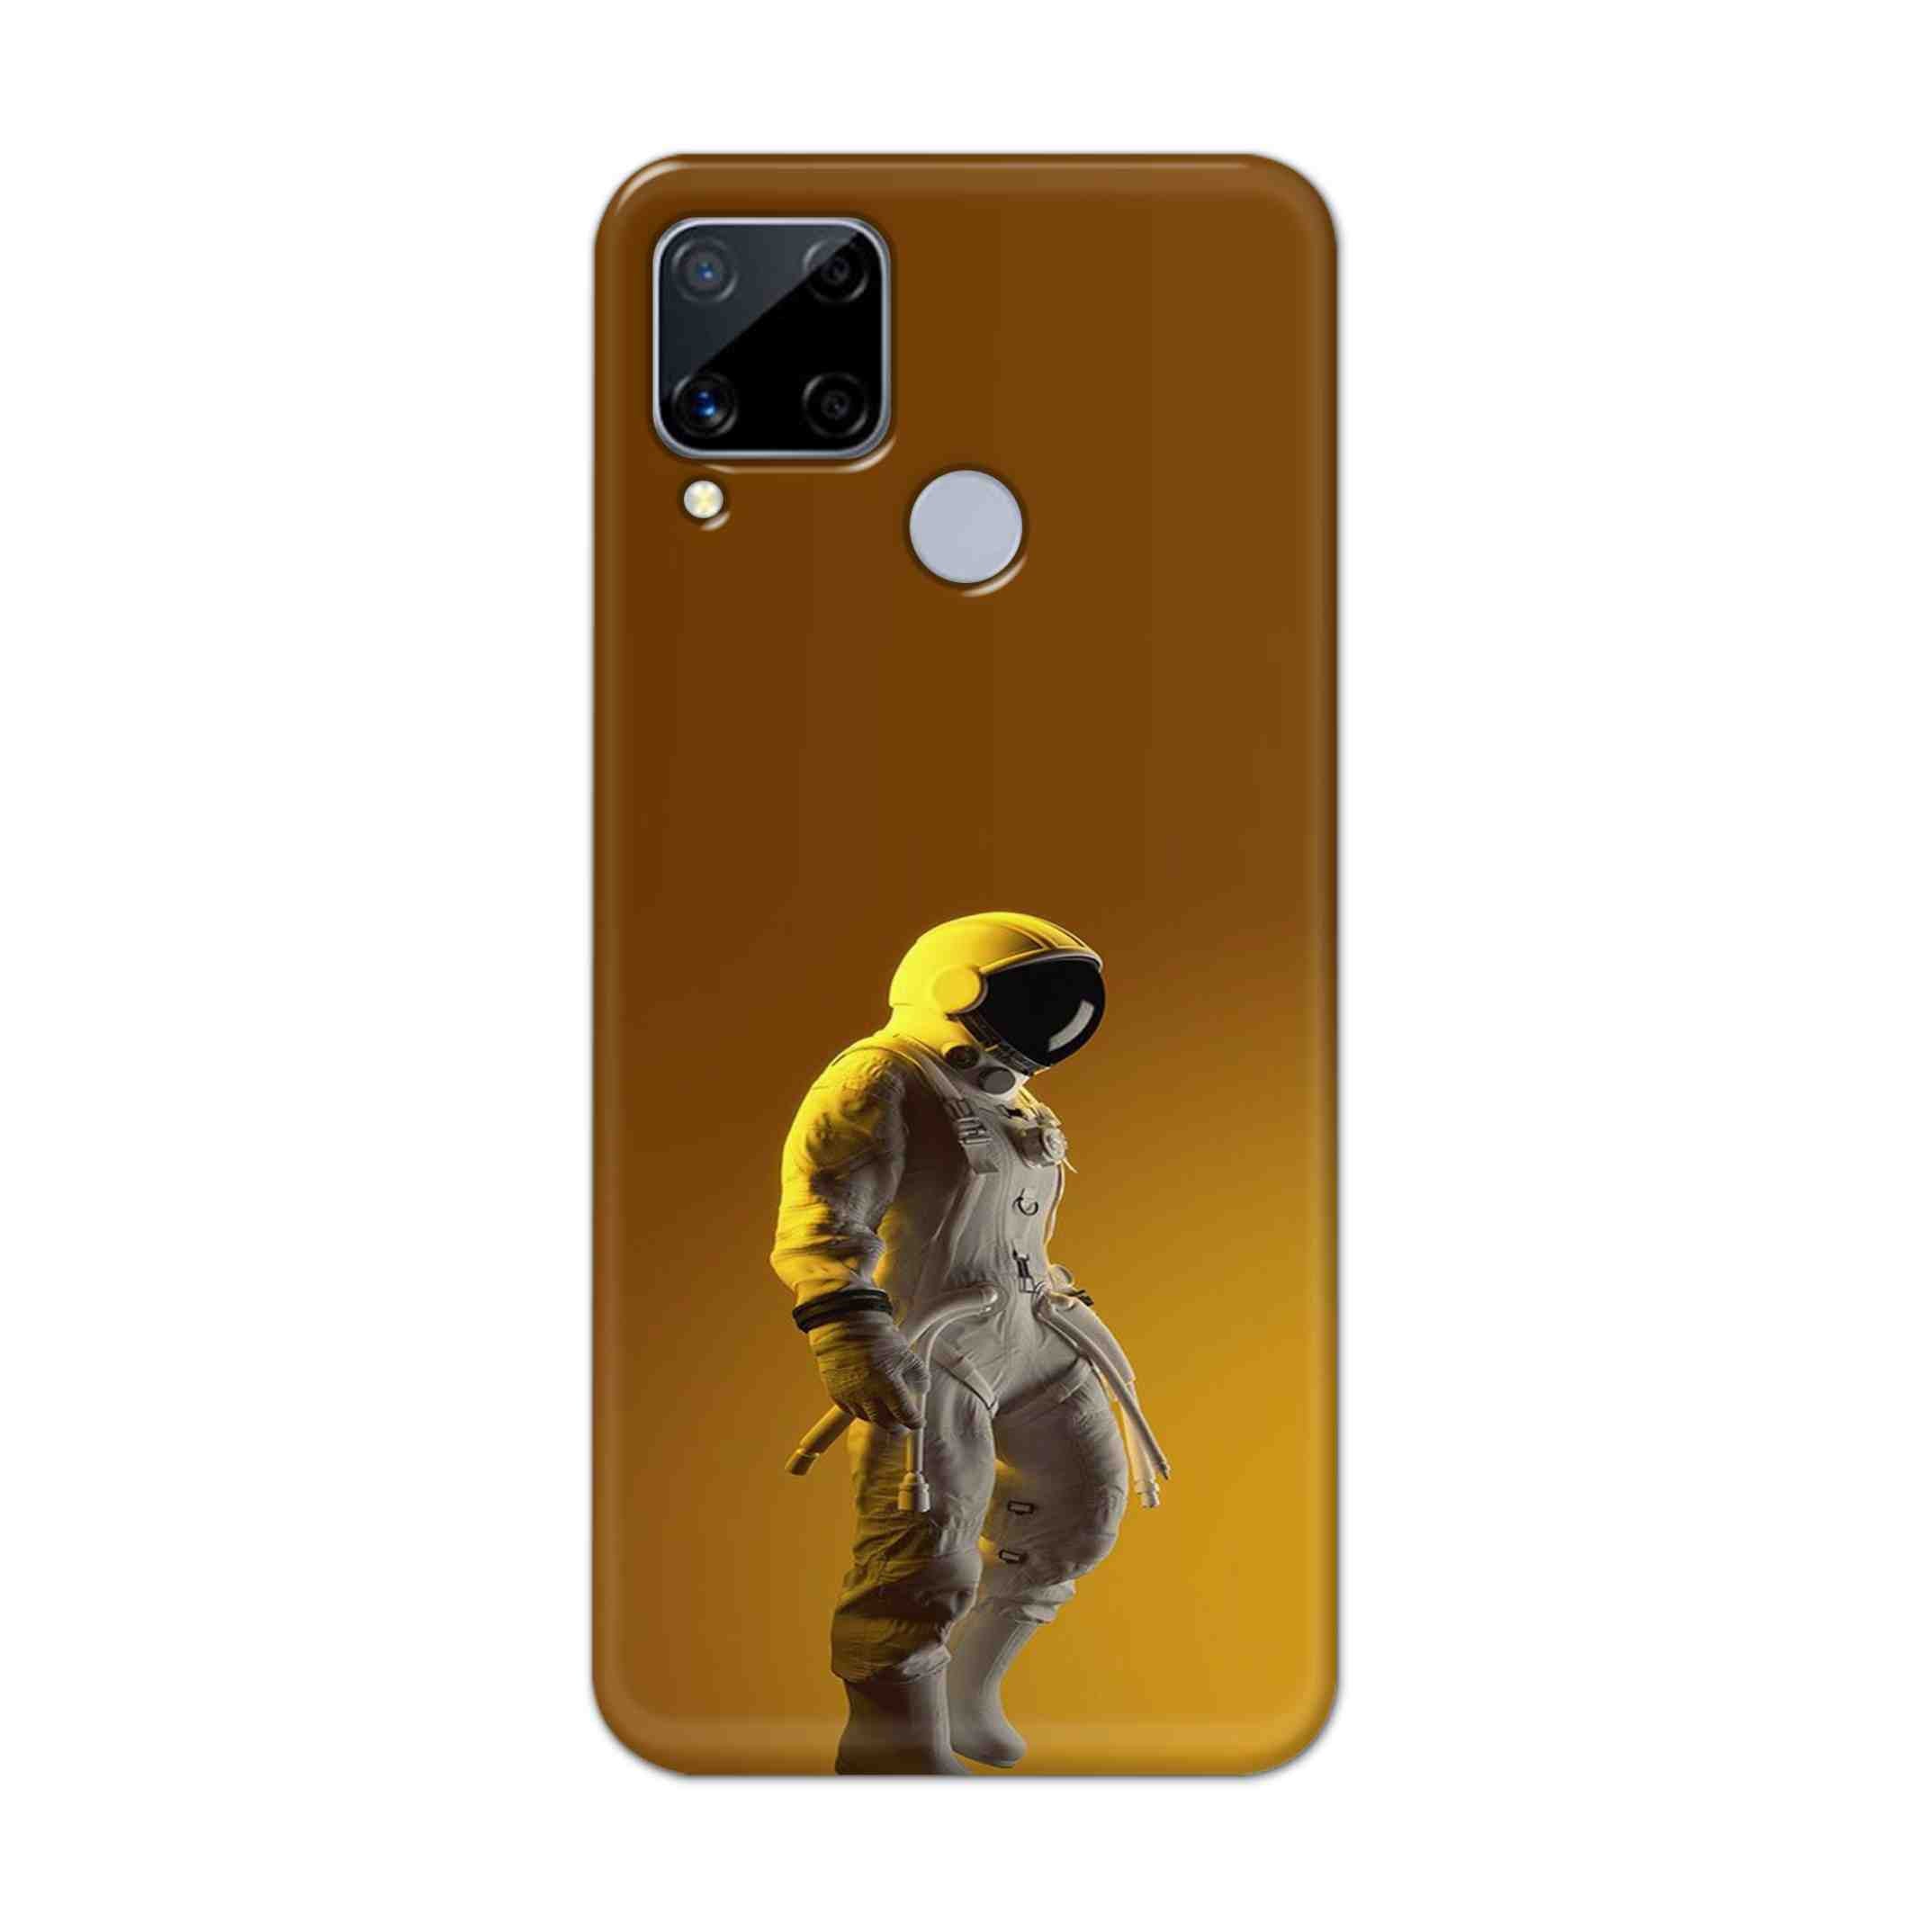 Buy Yellow Astronaut Hard Back Mobile Phone Case Cover For Realme C15 Online